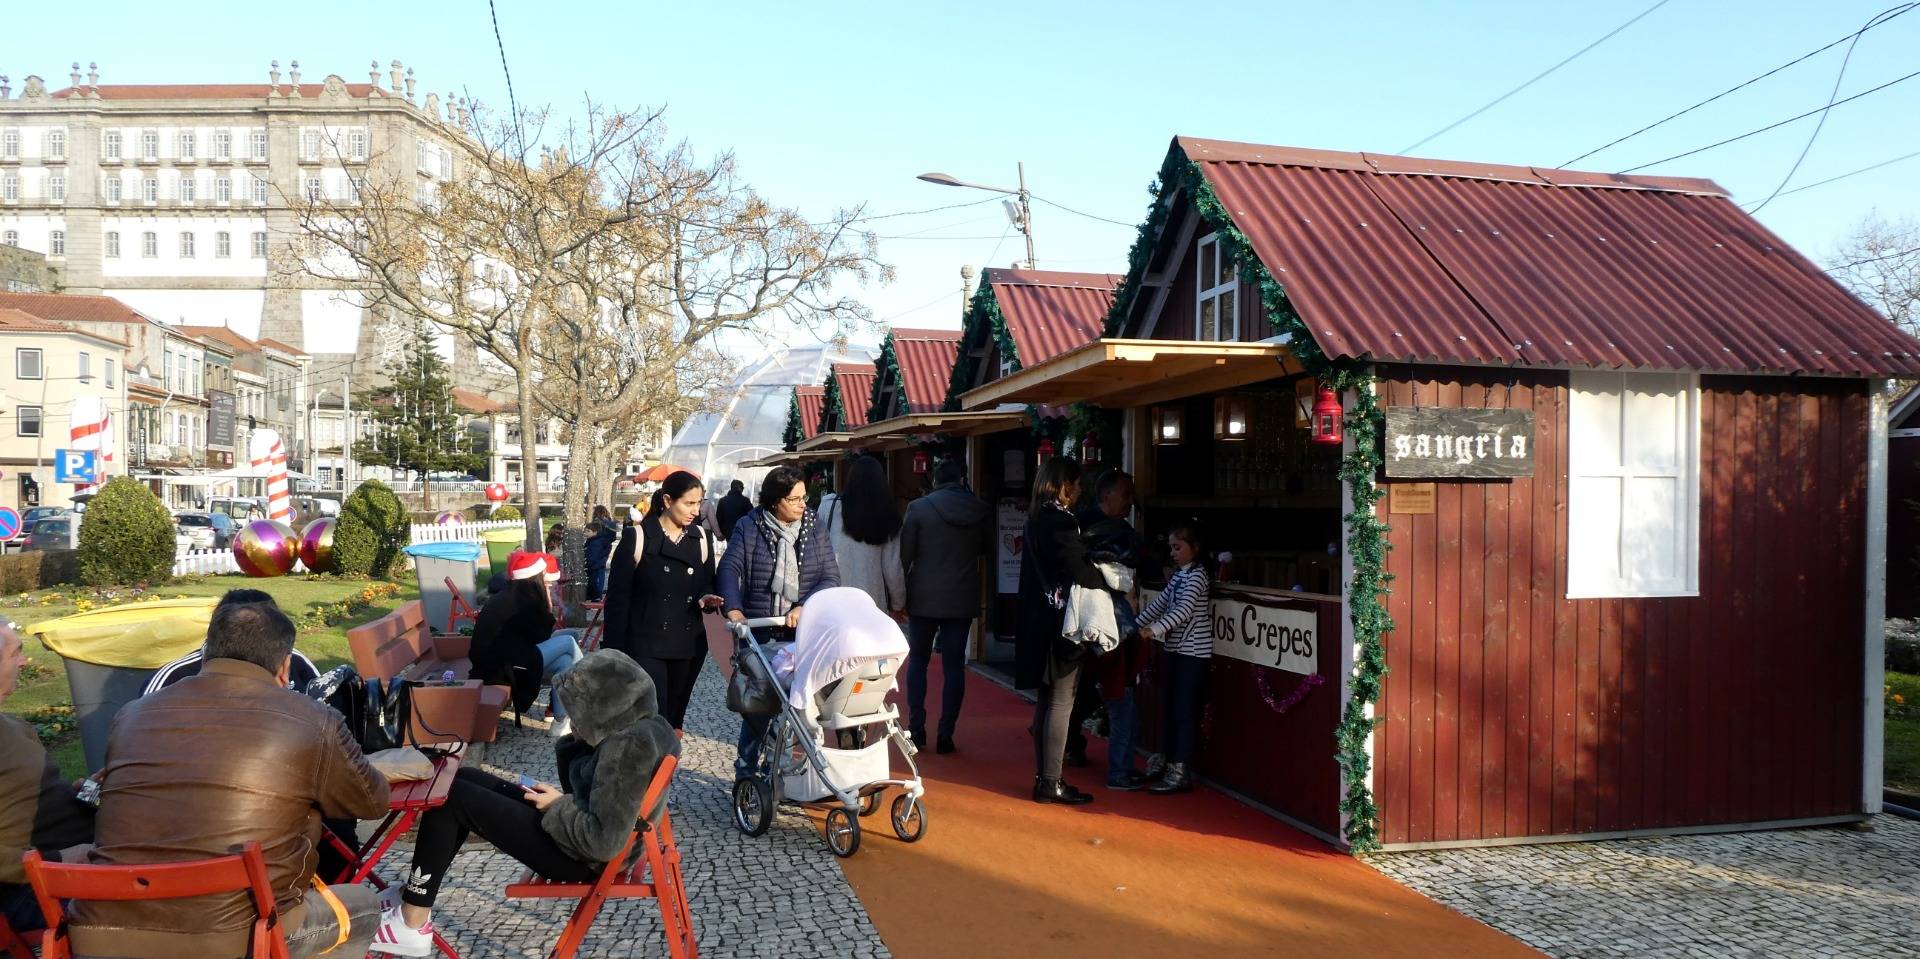 A Lovely Christmas Market in Vila do Conde (Portugal)